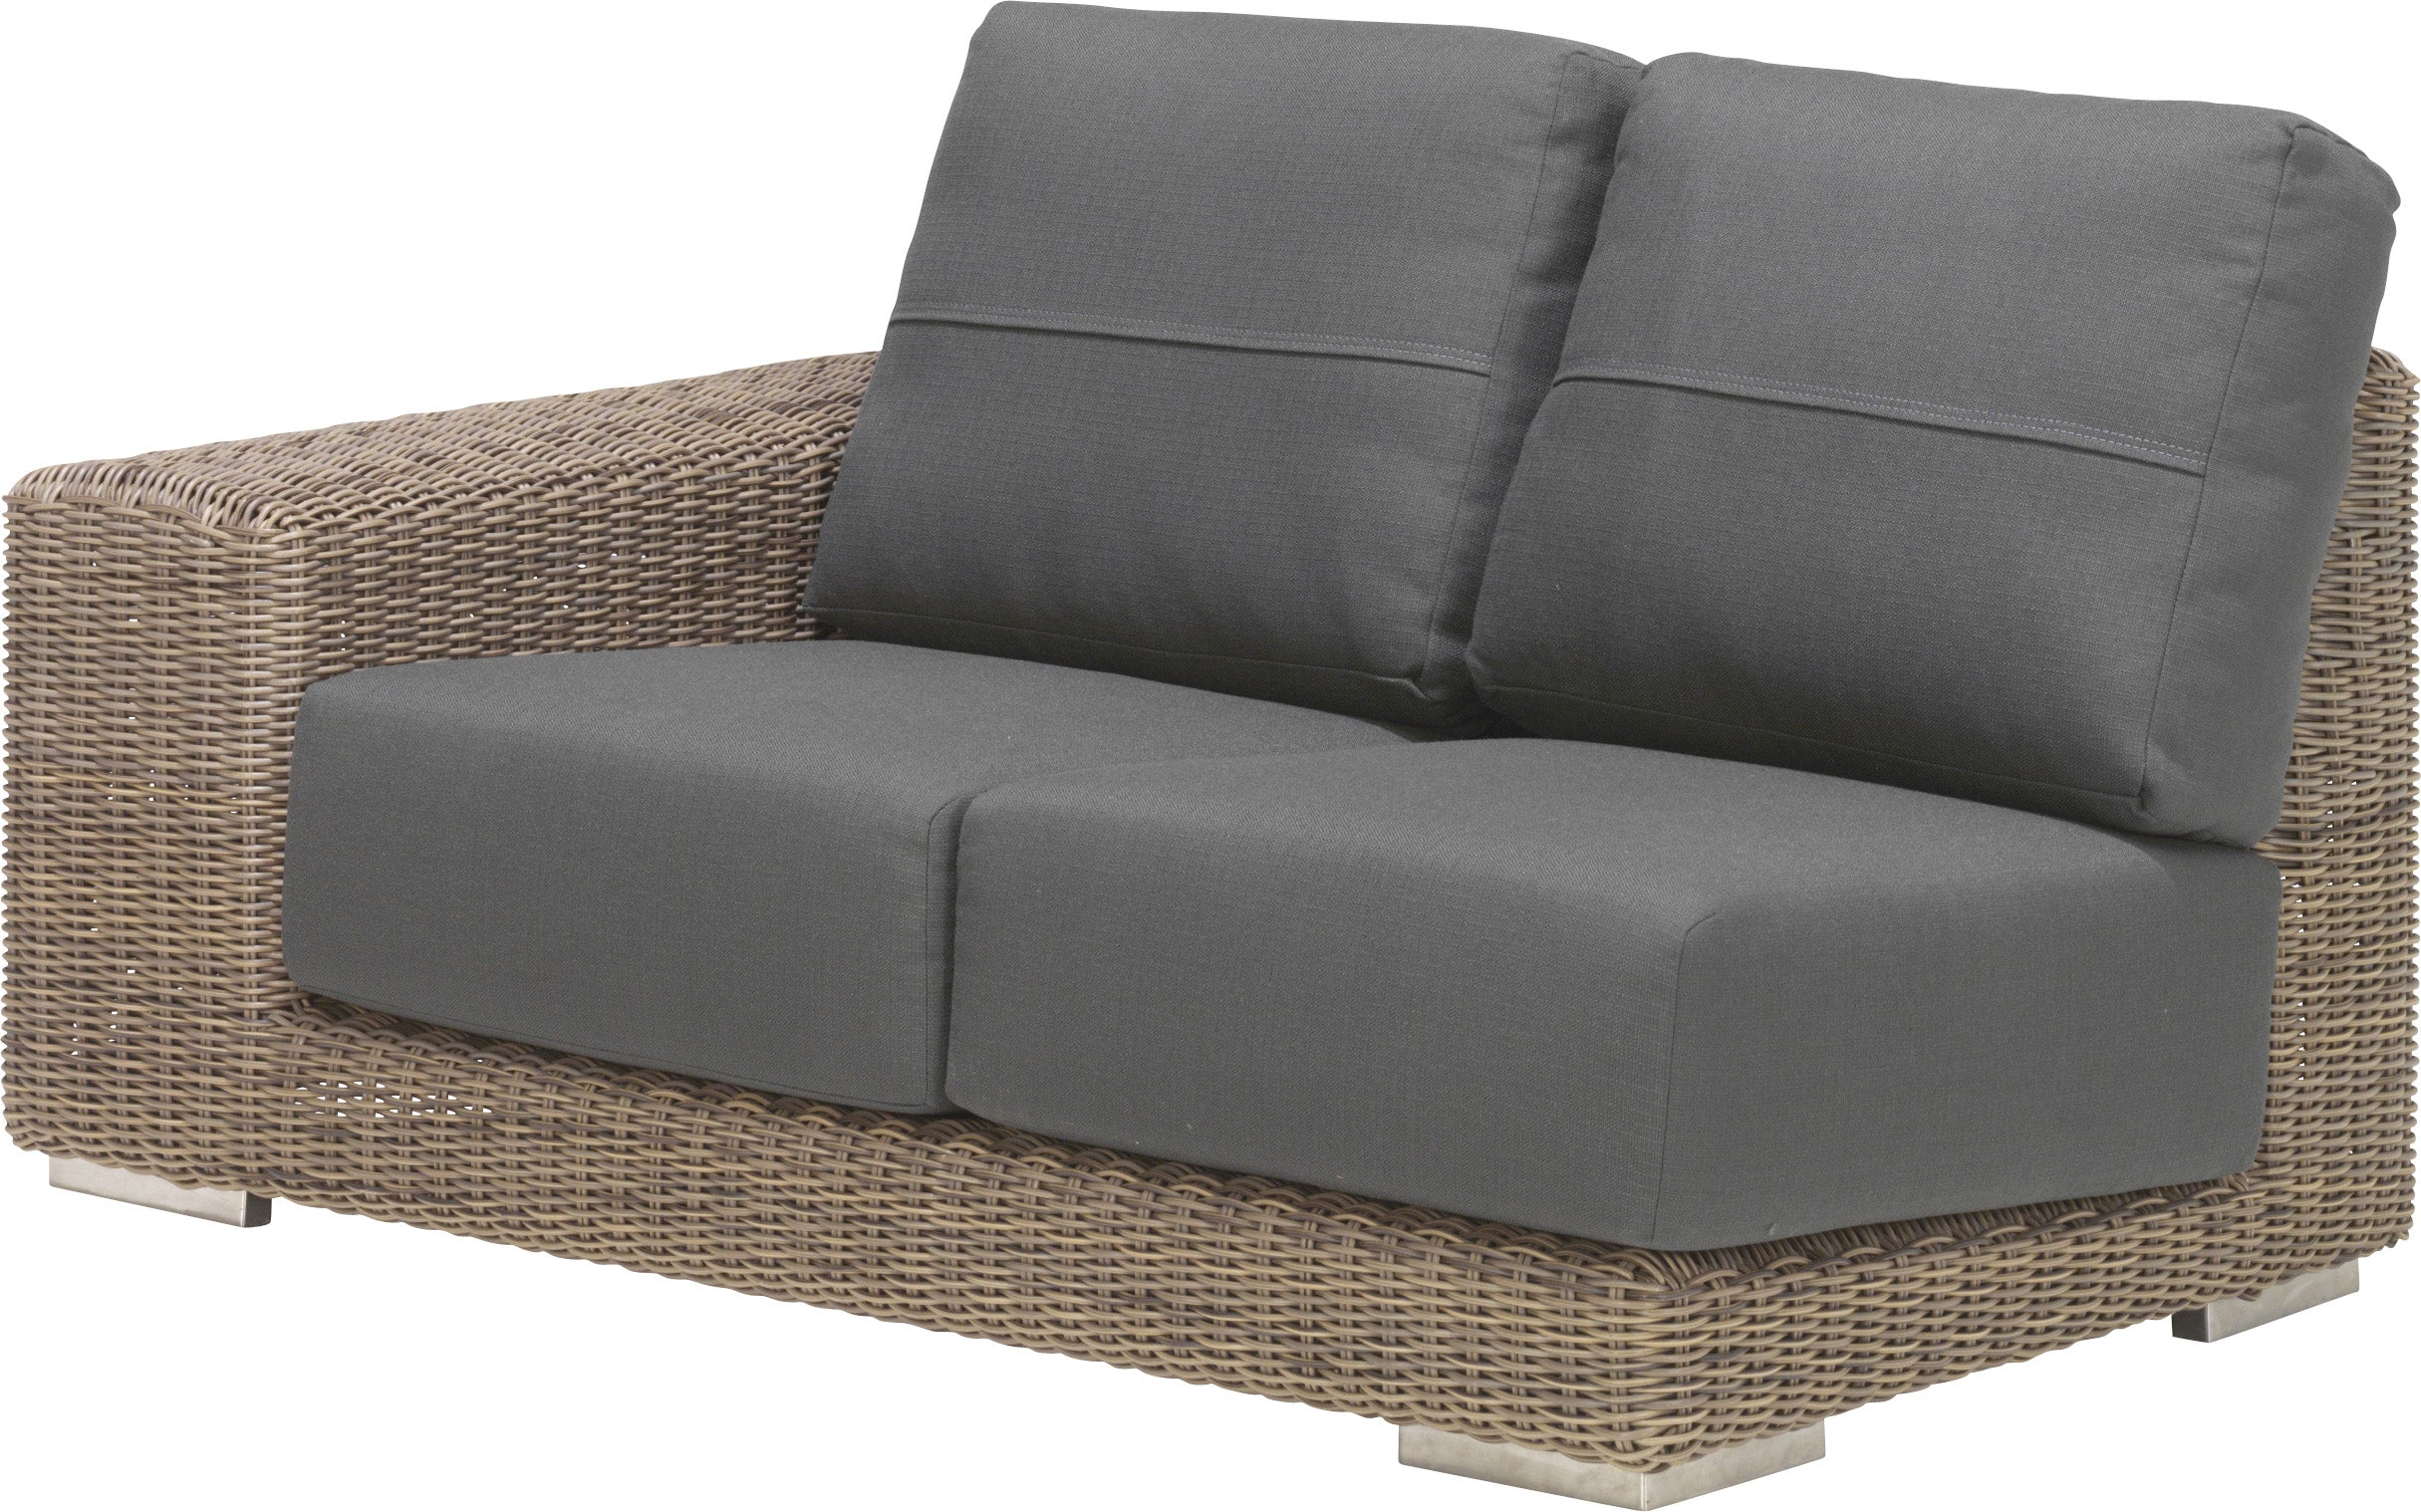 4 Seasons Outdoor Kingston Modular 2 Seater Right With 4 Cushions